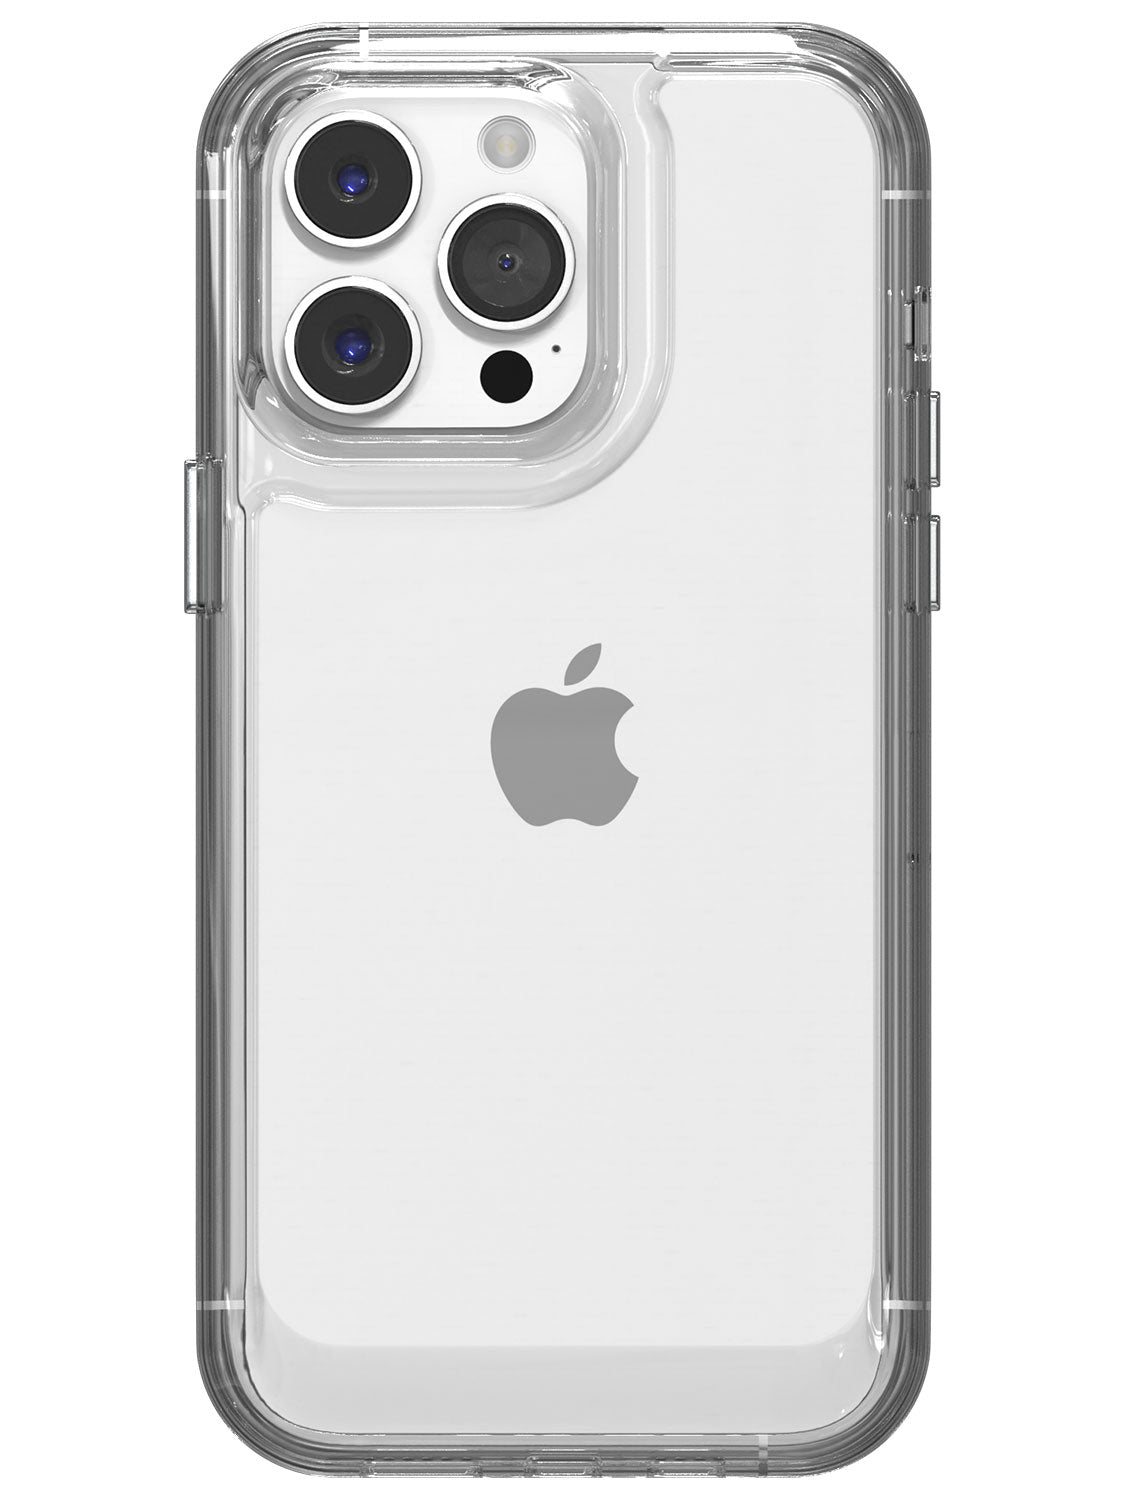 case for iPhone 14 Pro Max , back cover for iPhone 14 Pro Max , cases and covers for iPhone 14 Pro Max , clear case for iPhone 14 Pro Max , clear cover for iPhone 14 Pro Max , clear back cover for iPhone 14 Pro Max , transparent case for iPhone 14 Pro Max